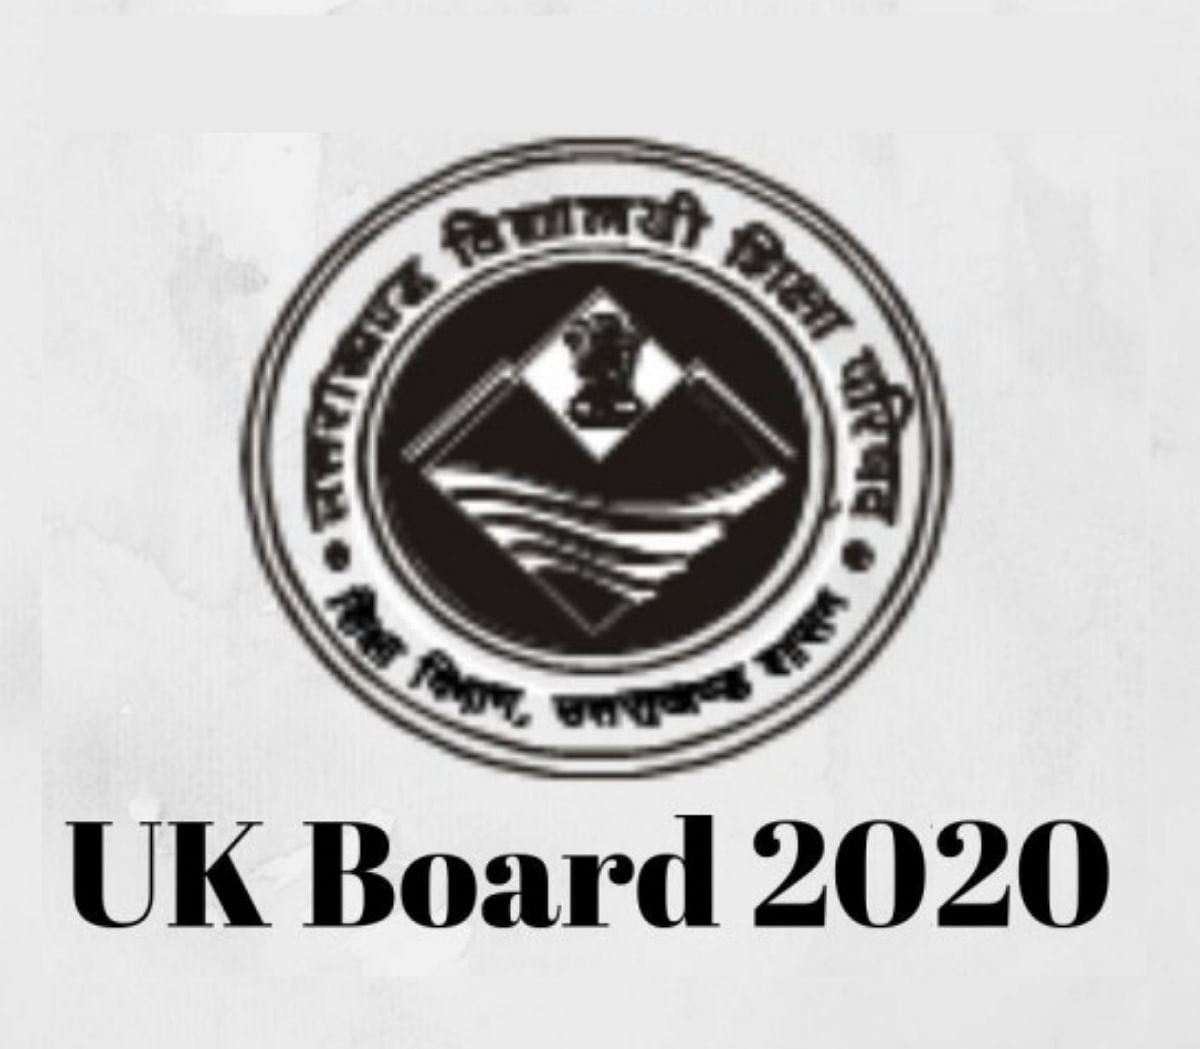 UK Board 2020: Check Important Details for the Upcoming Exam